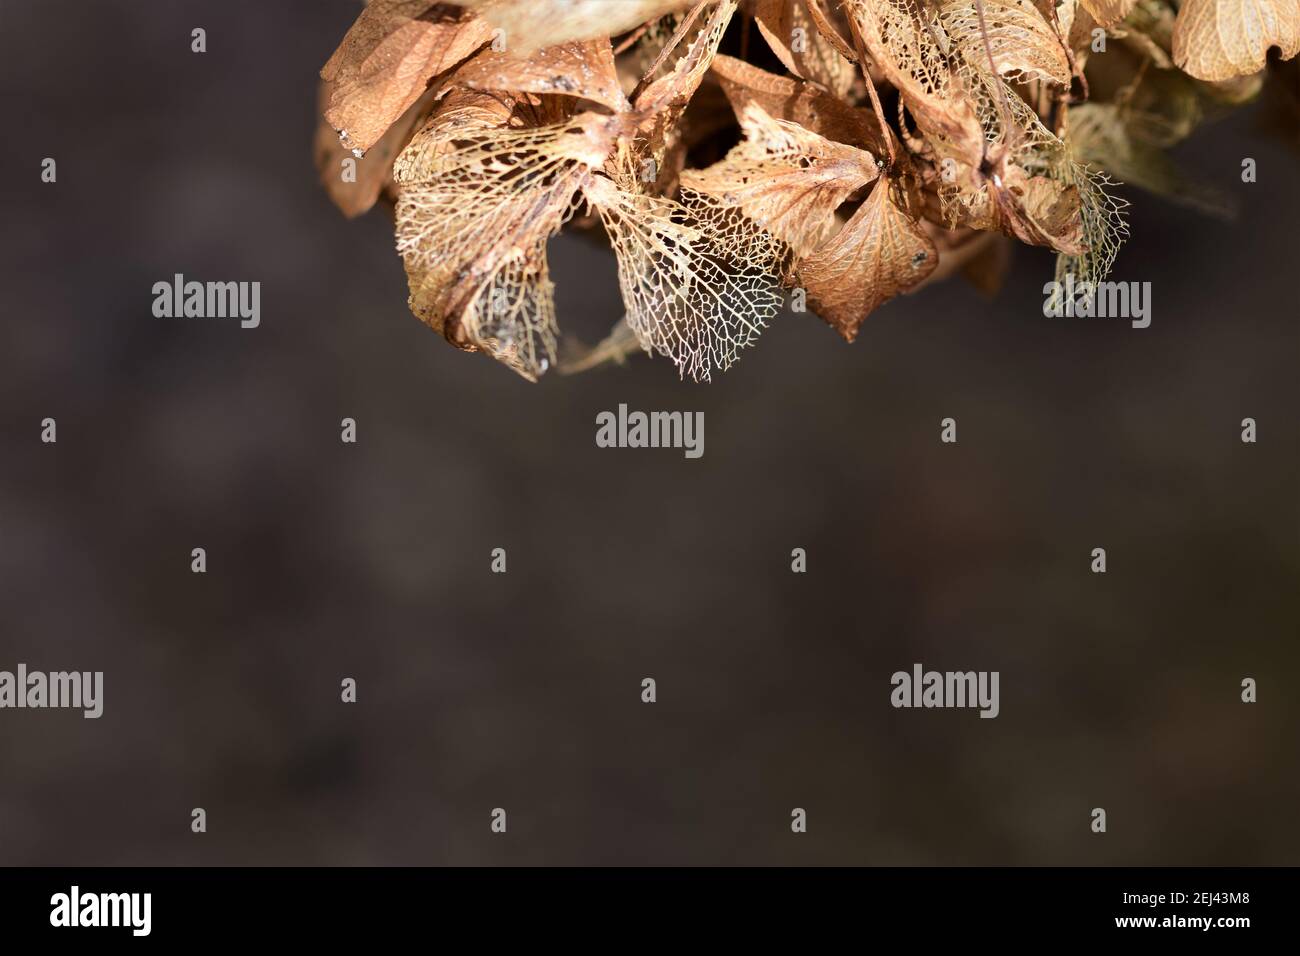 Dry hydrangea umbels against a dark background Stock Photo